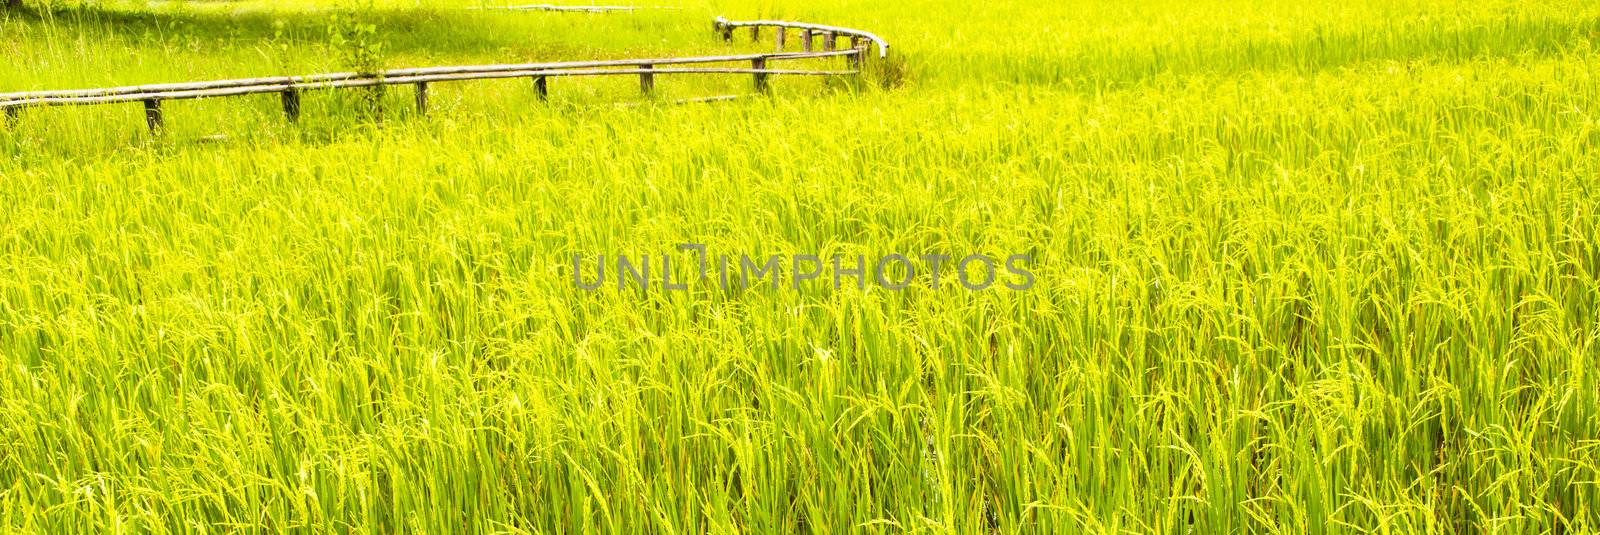 Horizontal shot of a paddy field with a wooden fence